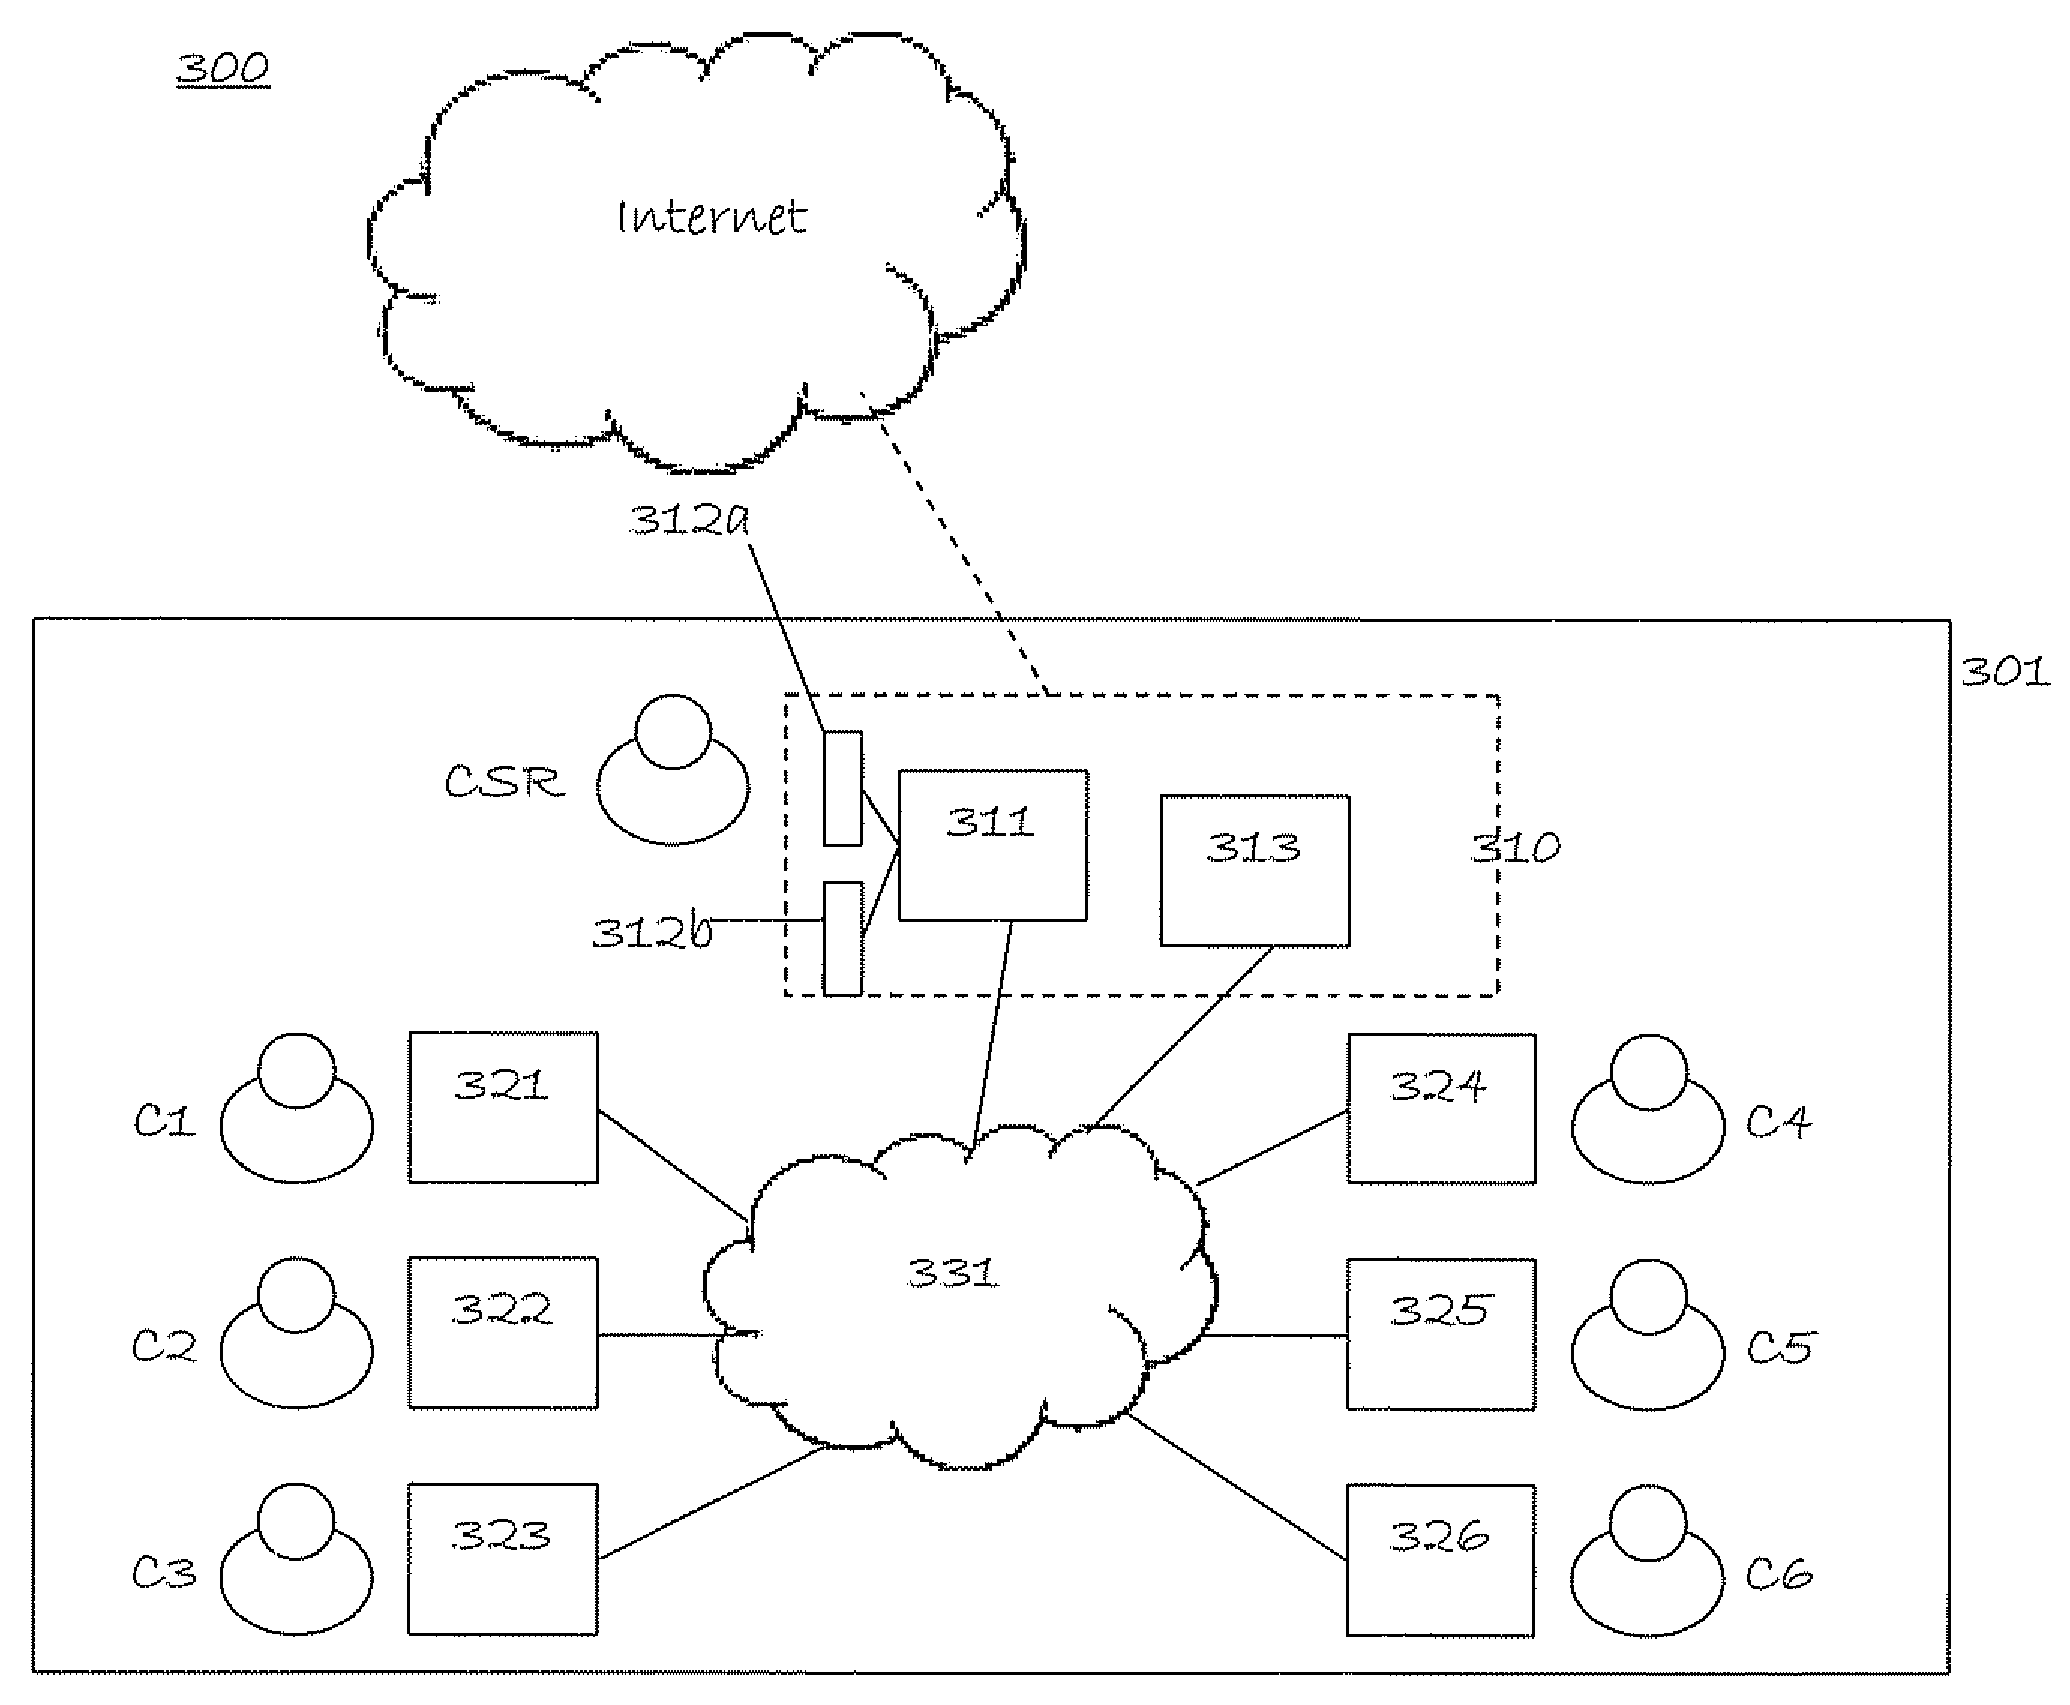 System and Method for Managing Network-Based Services